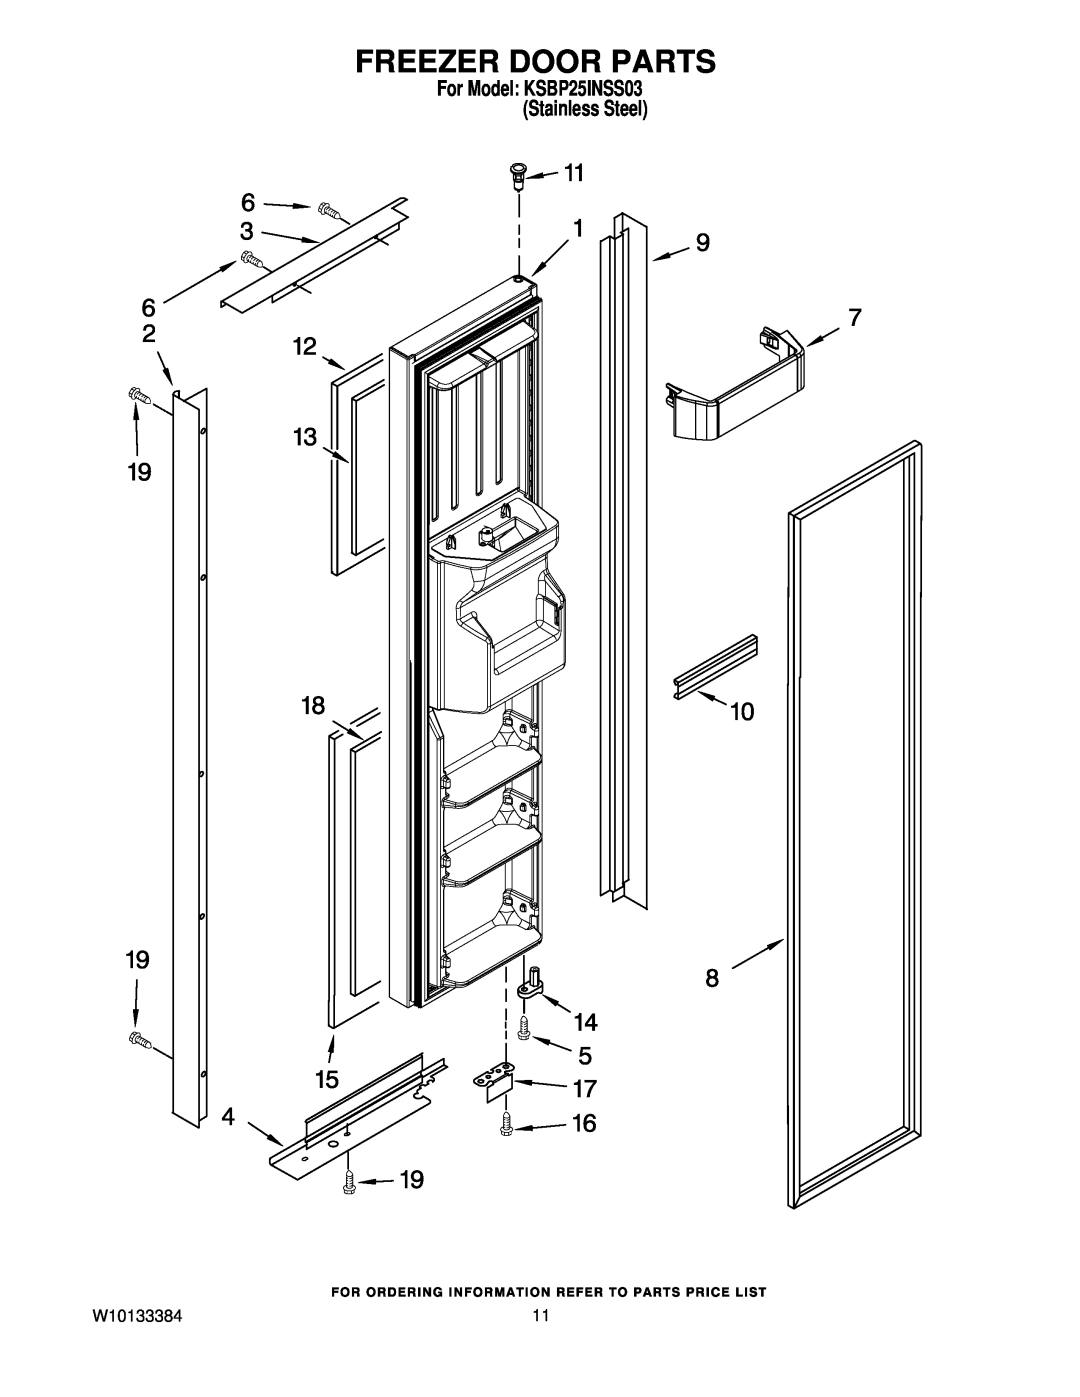 KitchenAid manual Freezer Door Parts, W10133384, For Model KSBP25INSS03 Stainless Steel 